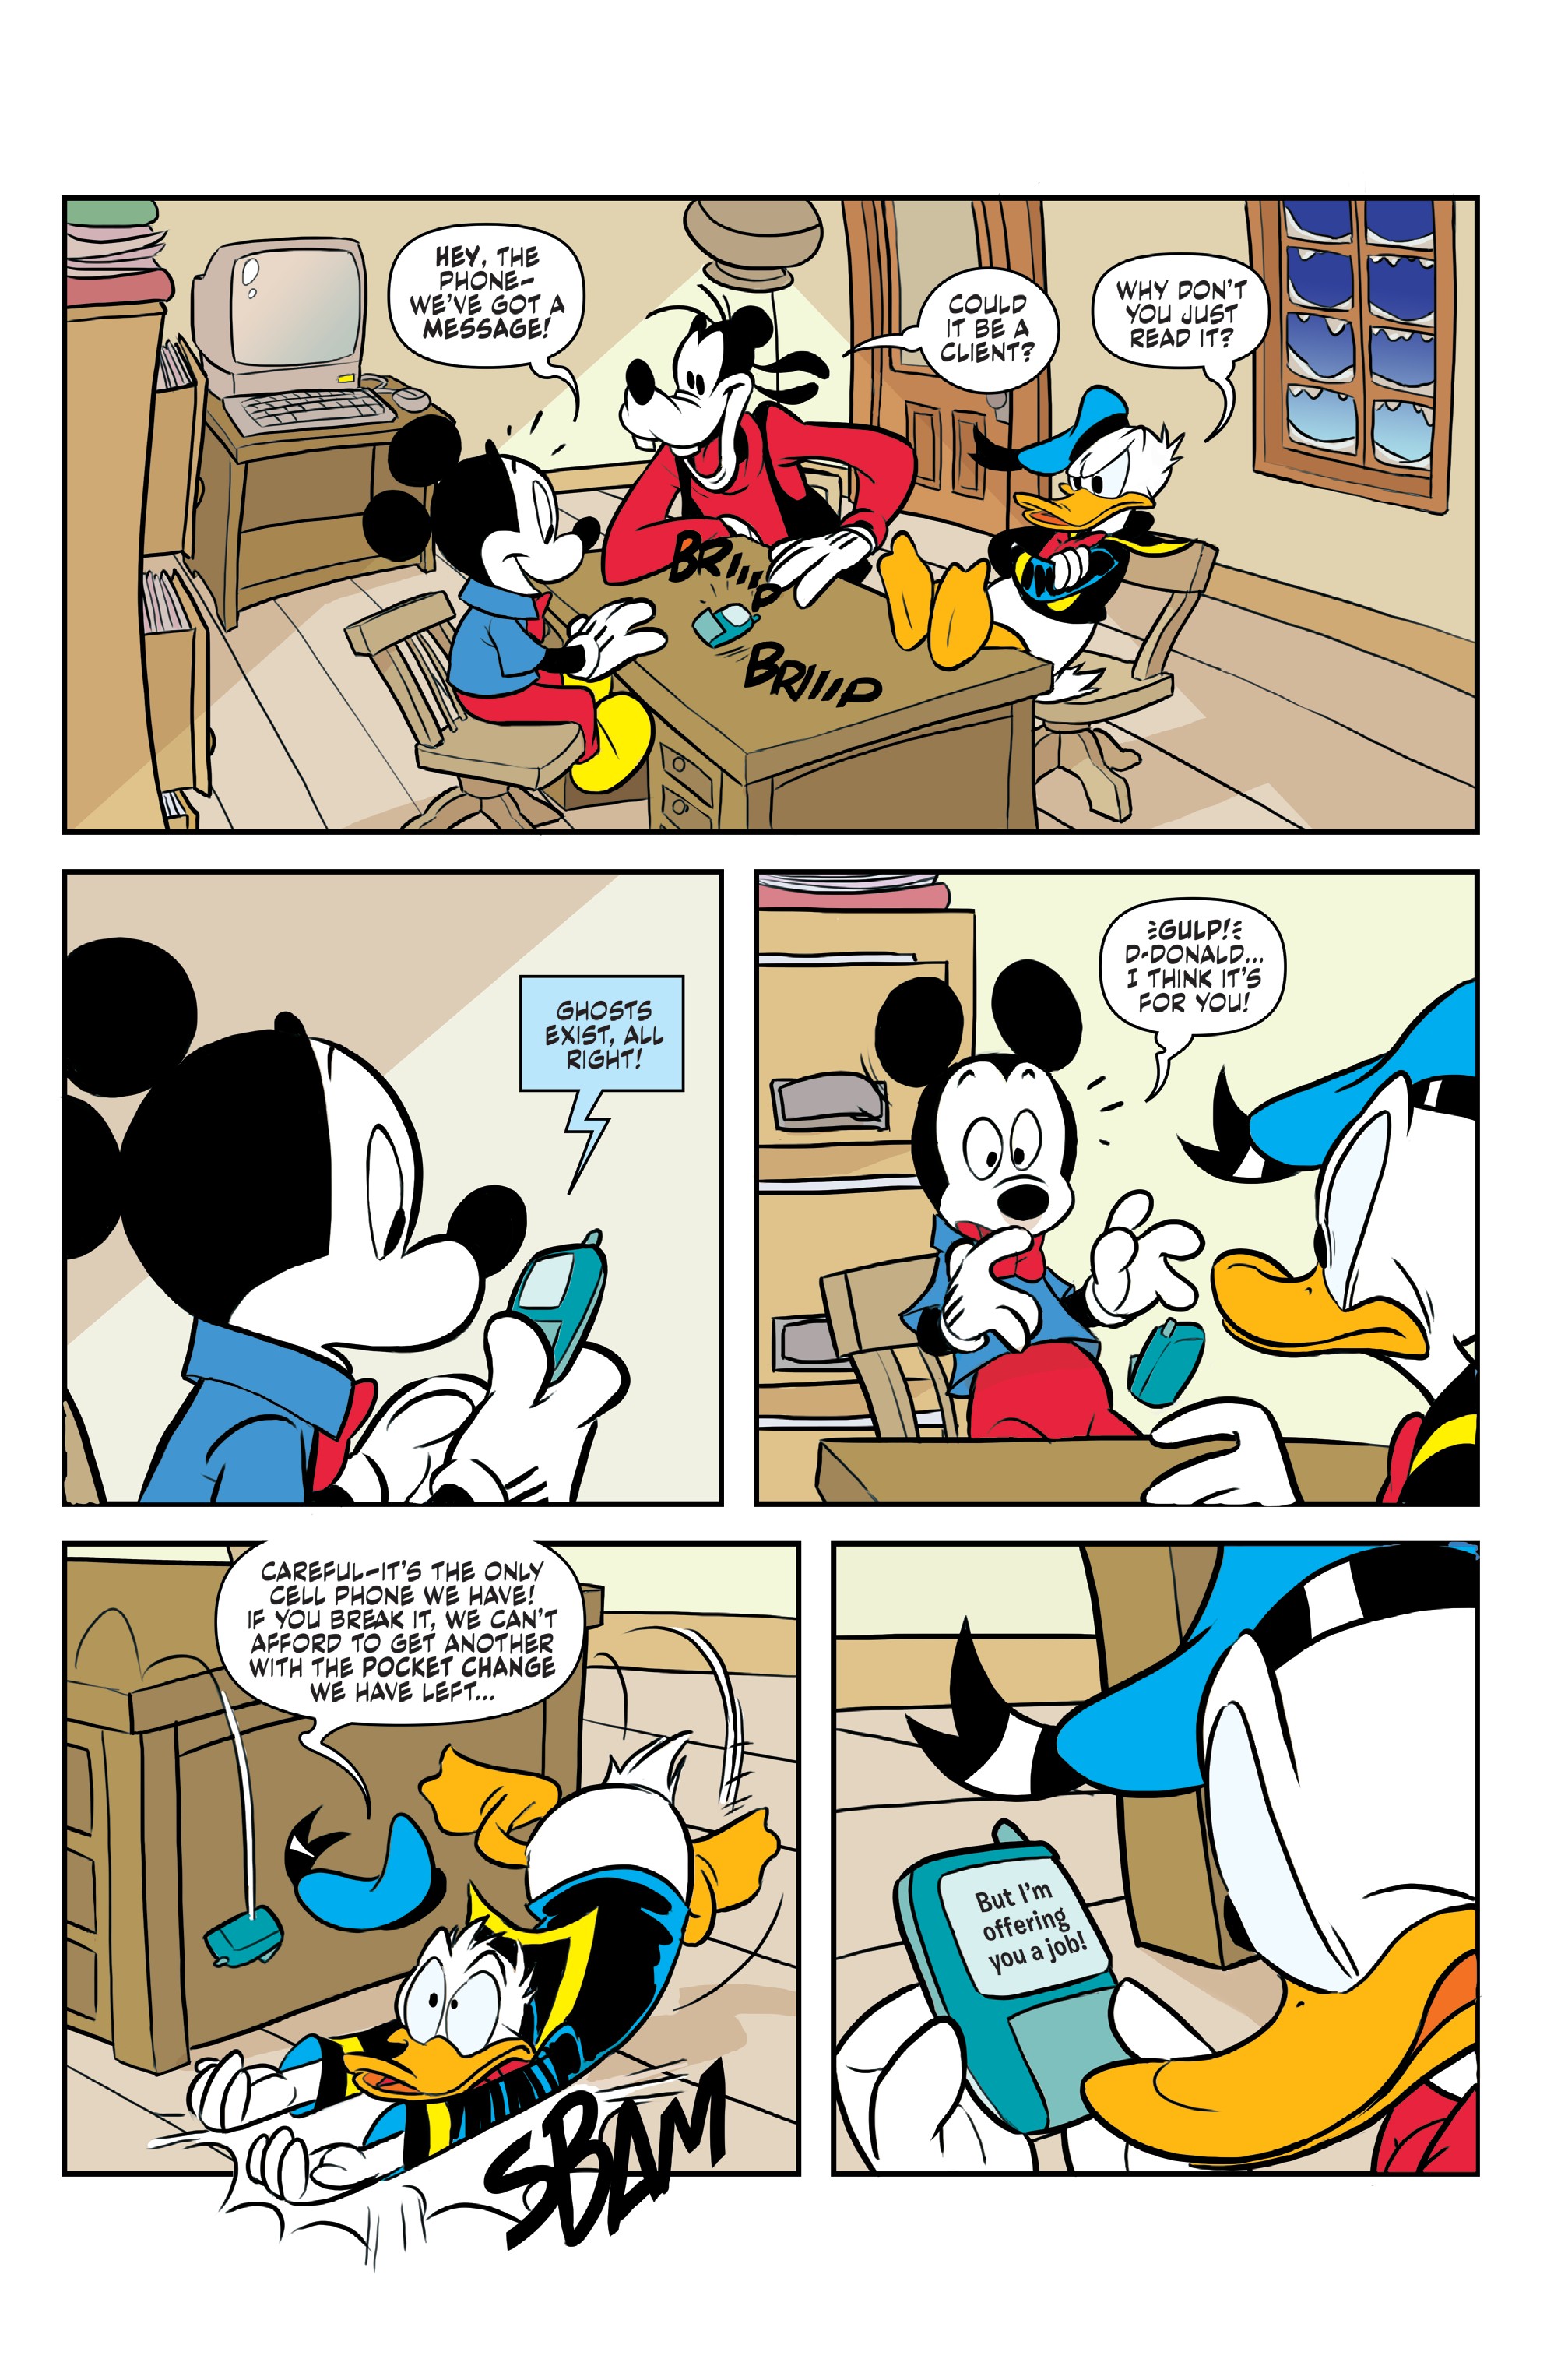 Disney Comics and Stories (2018-): Chapter 2 - Page 4